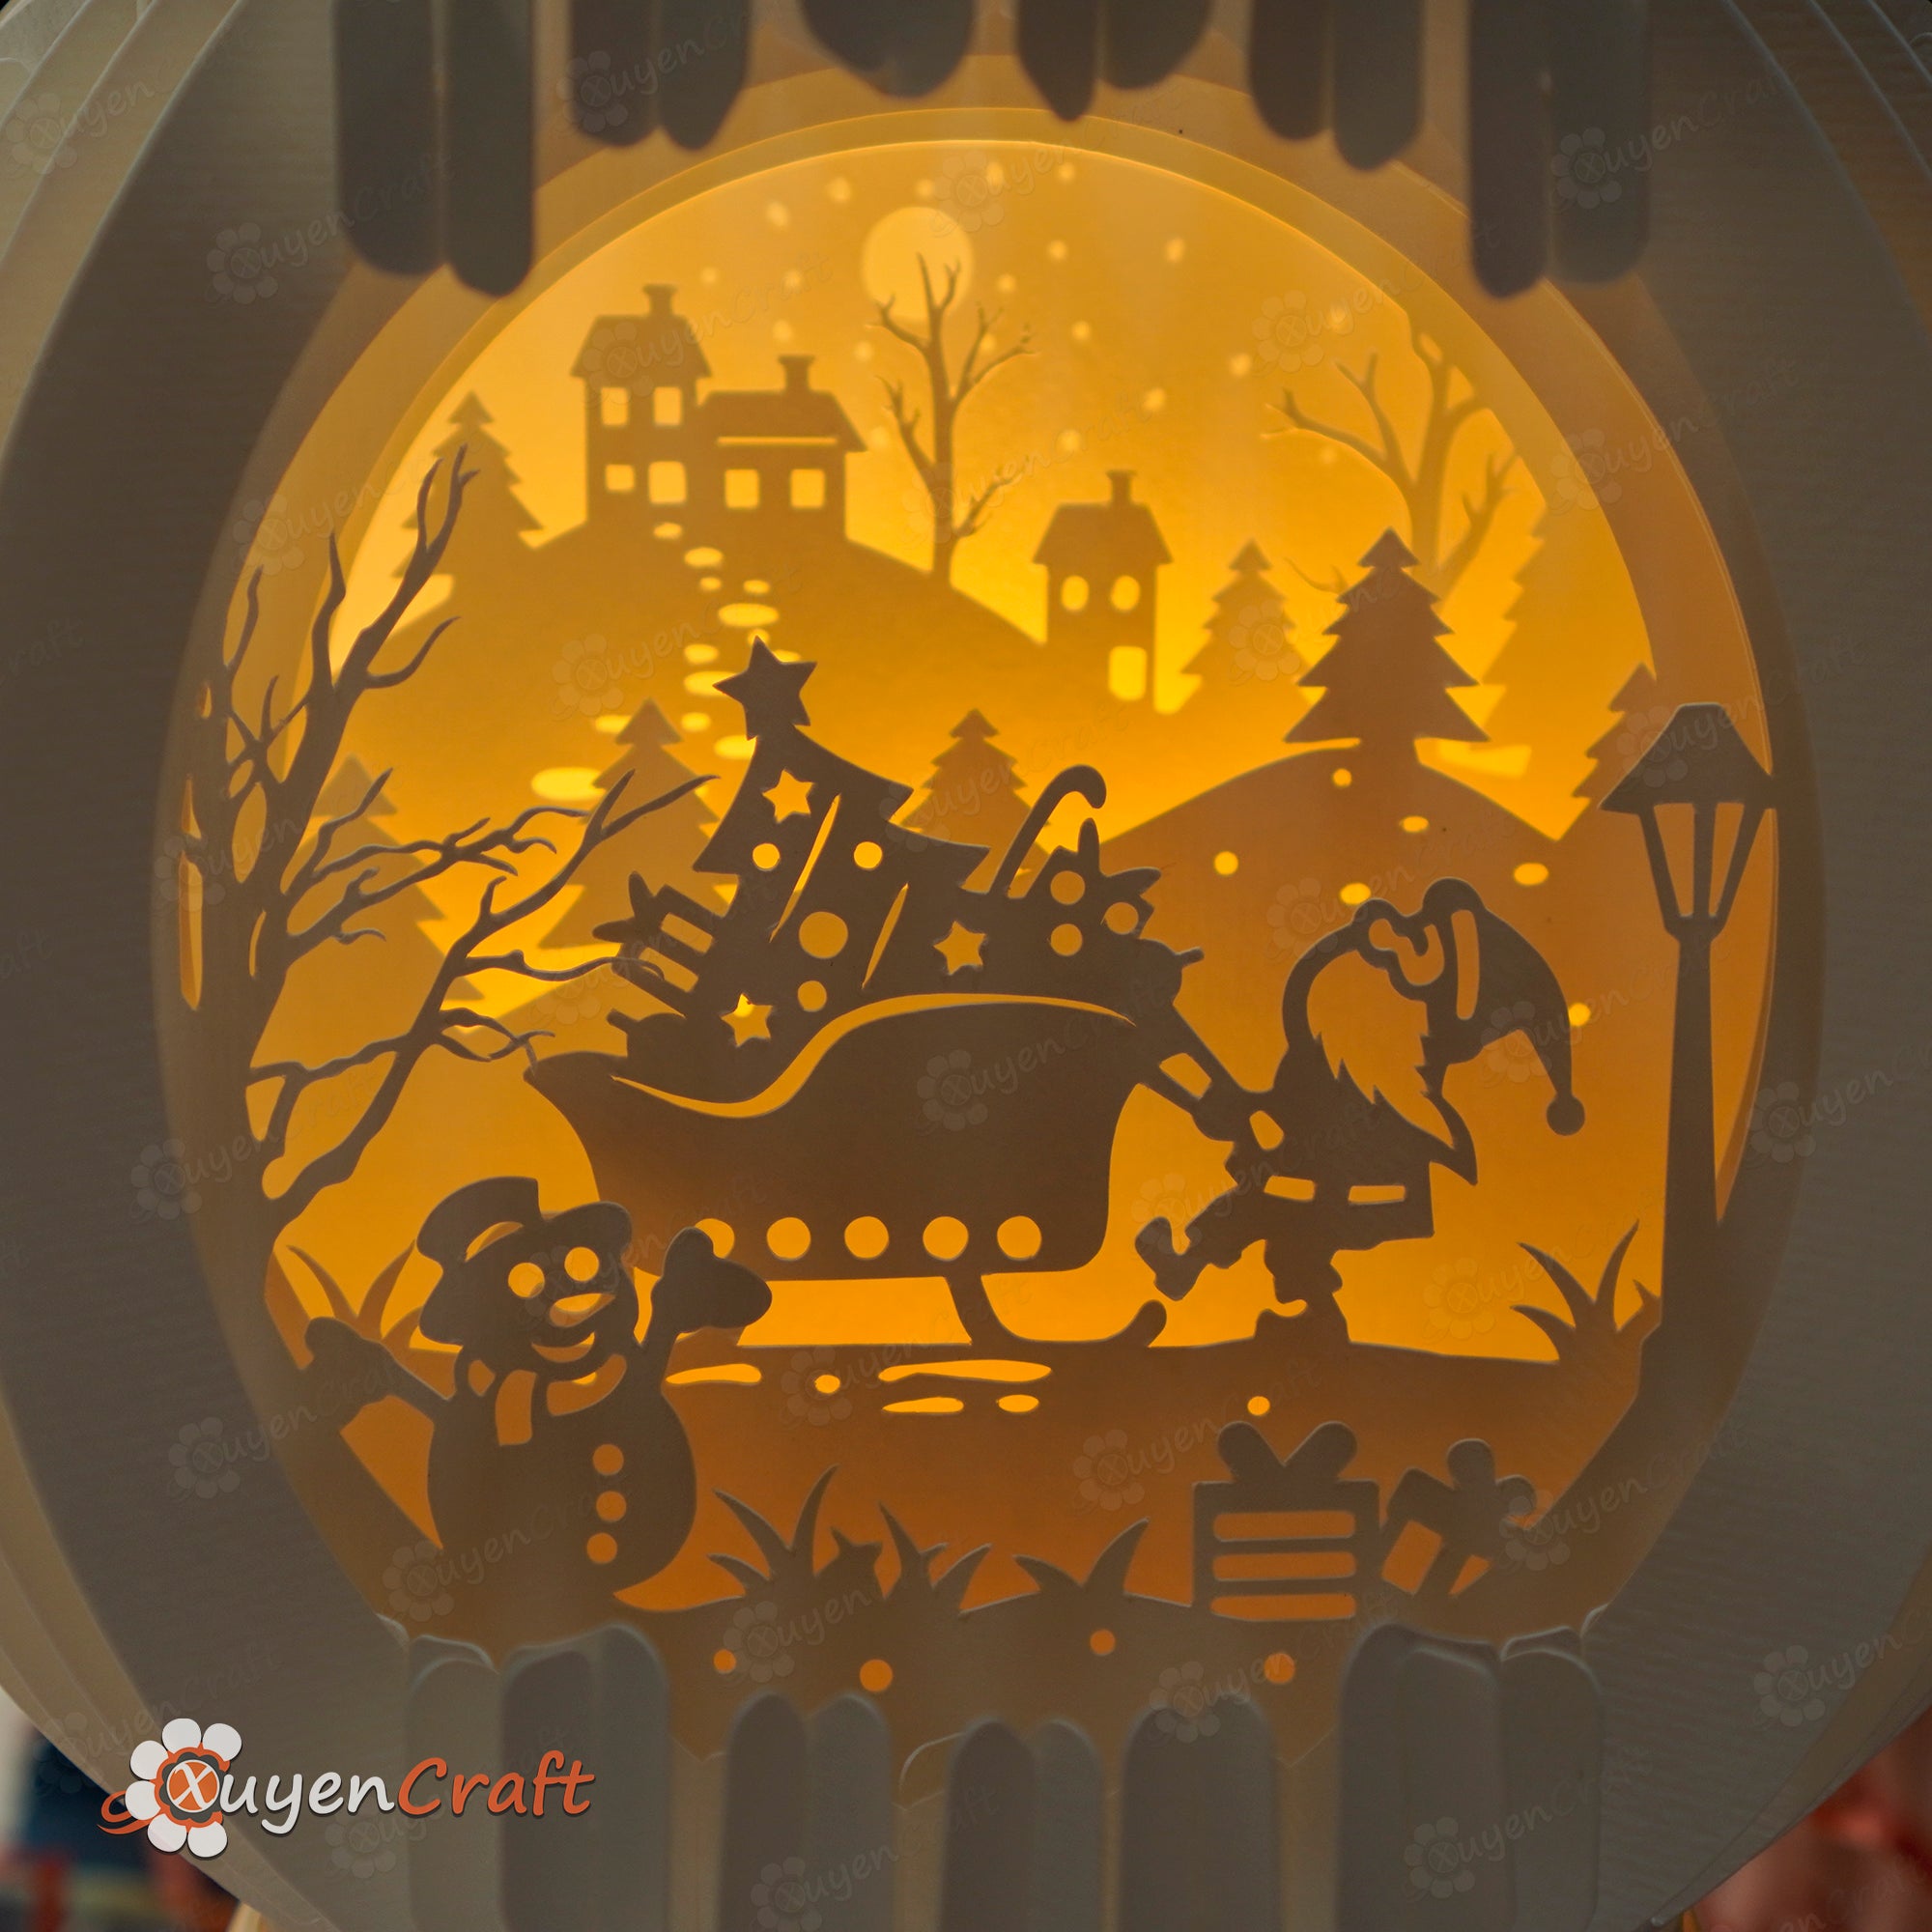 3D Christmas SVG, Silhouette Studio Templates Creating Snow Globe Pop Up Santa Claus Pull The Gift Cart